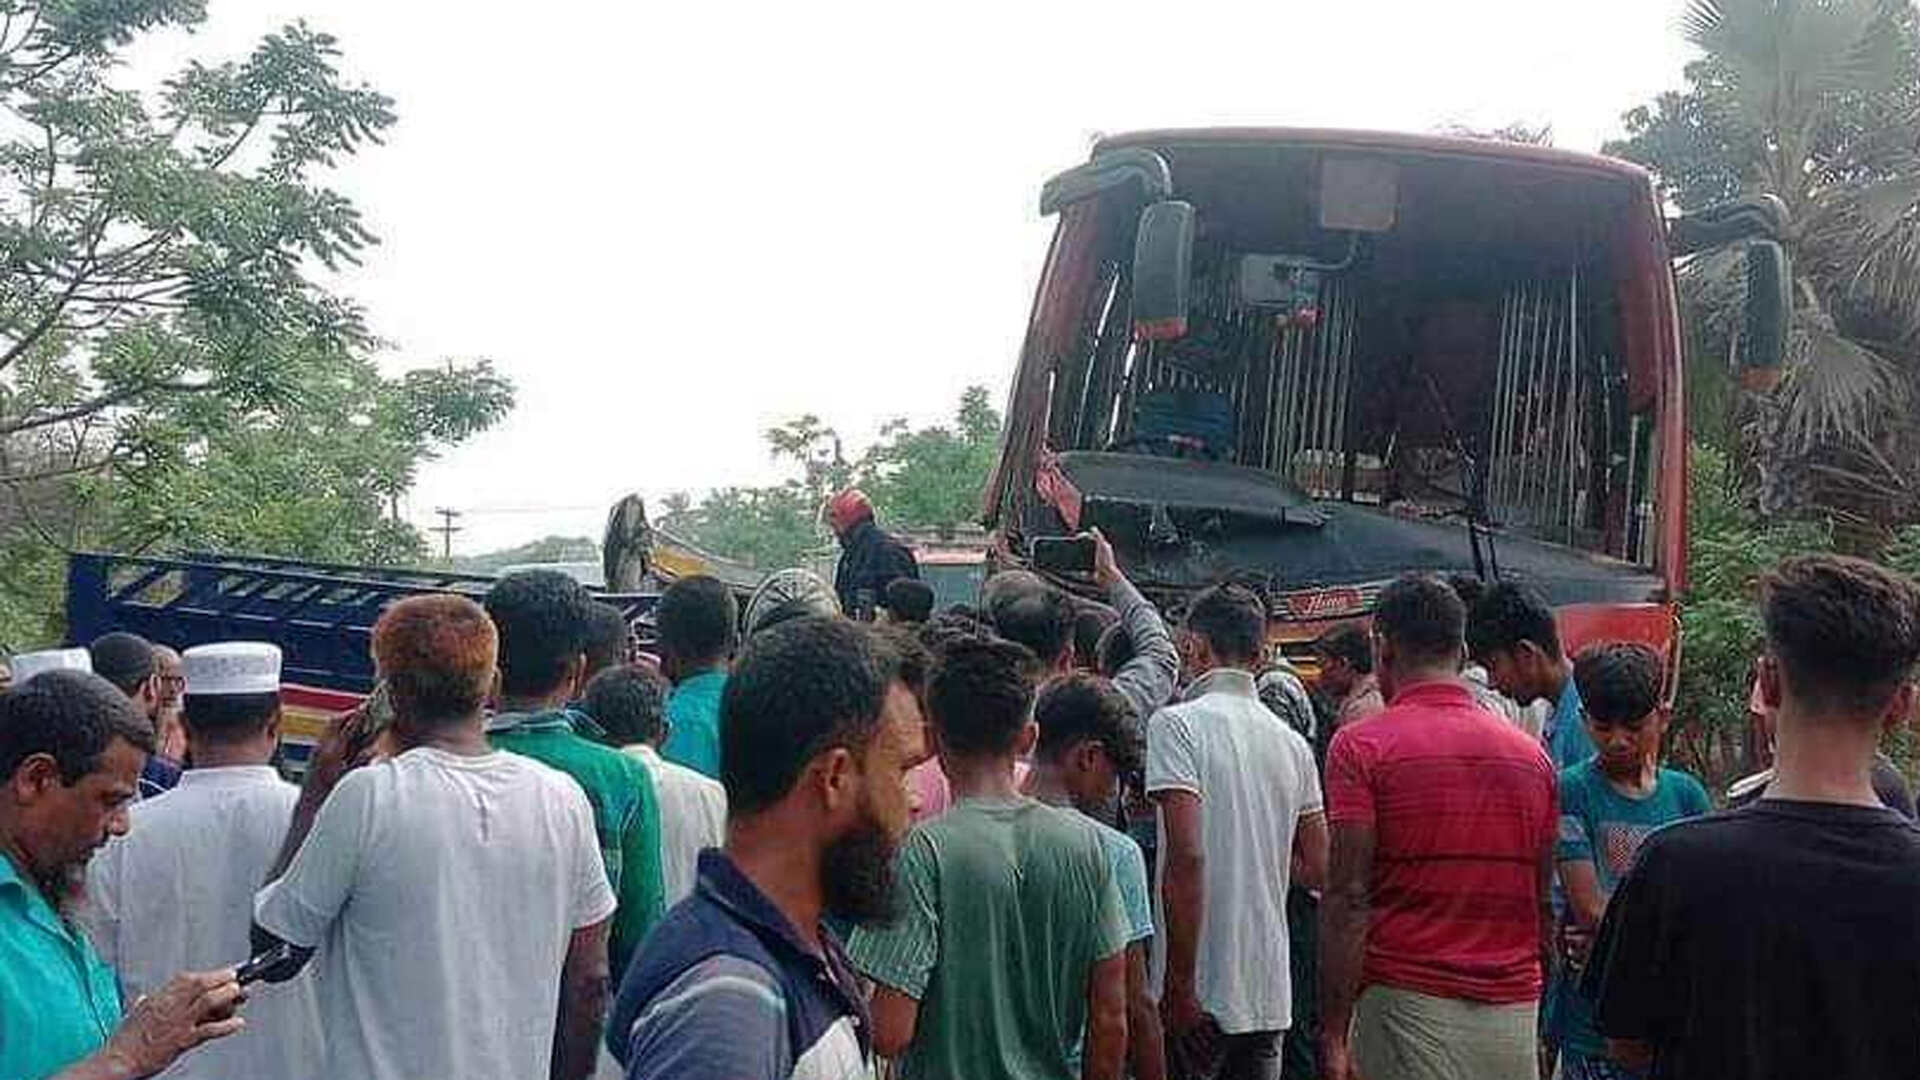 13 dead in bus-pickup collision